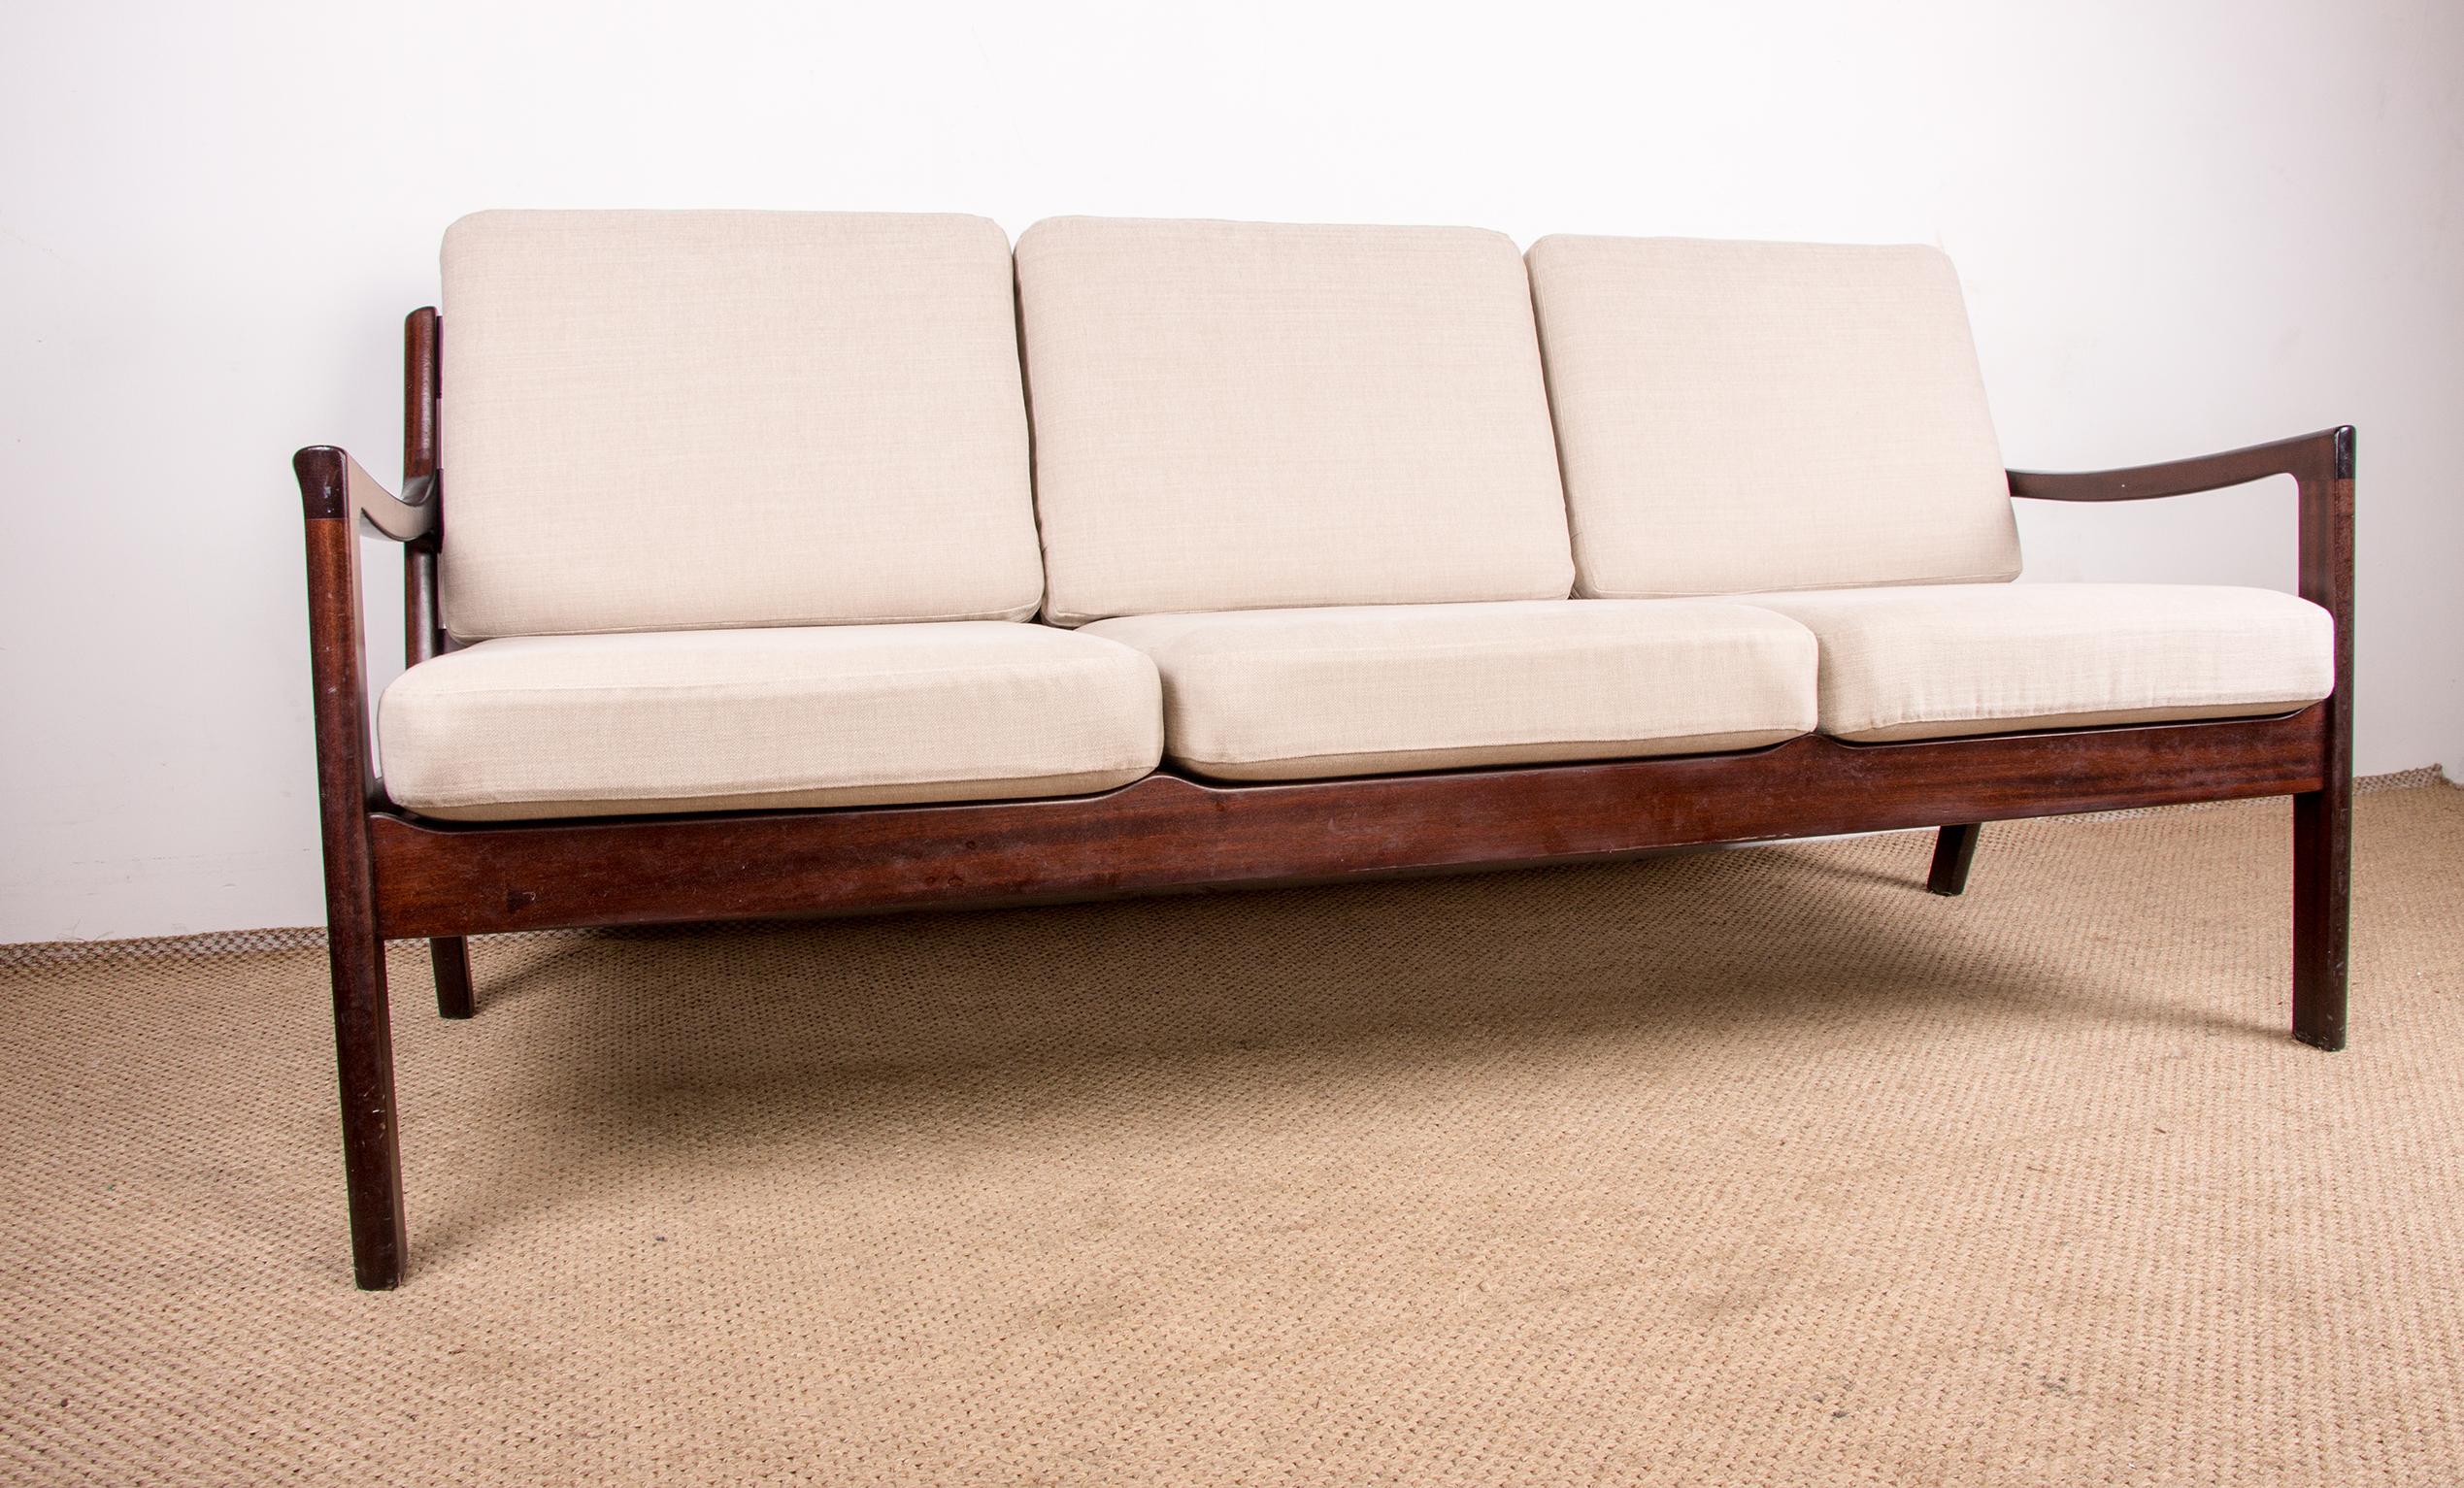 Superb Scandinavian sofa. Structure in solid Mahogany, the seats and cushions have been redone in new light beige fabric, very comfortable. Sober and very elegant design. Very good build quality. Furniture listed on the Design Museum Denmark website